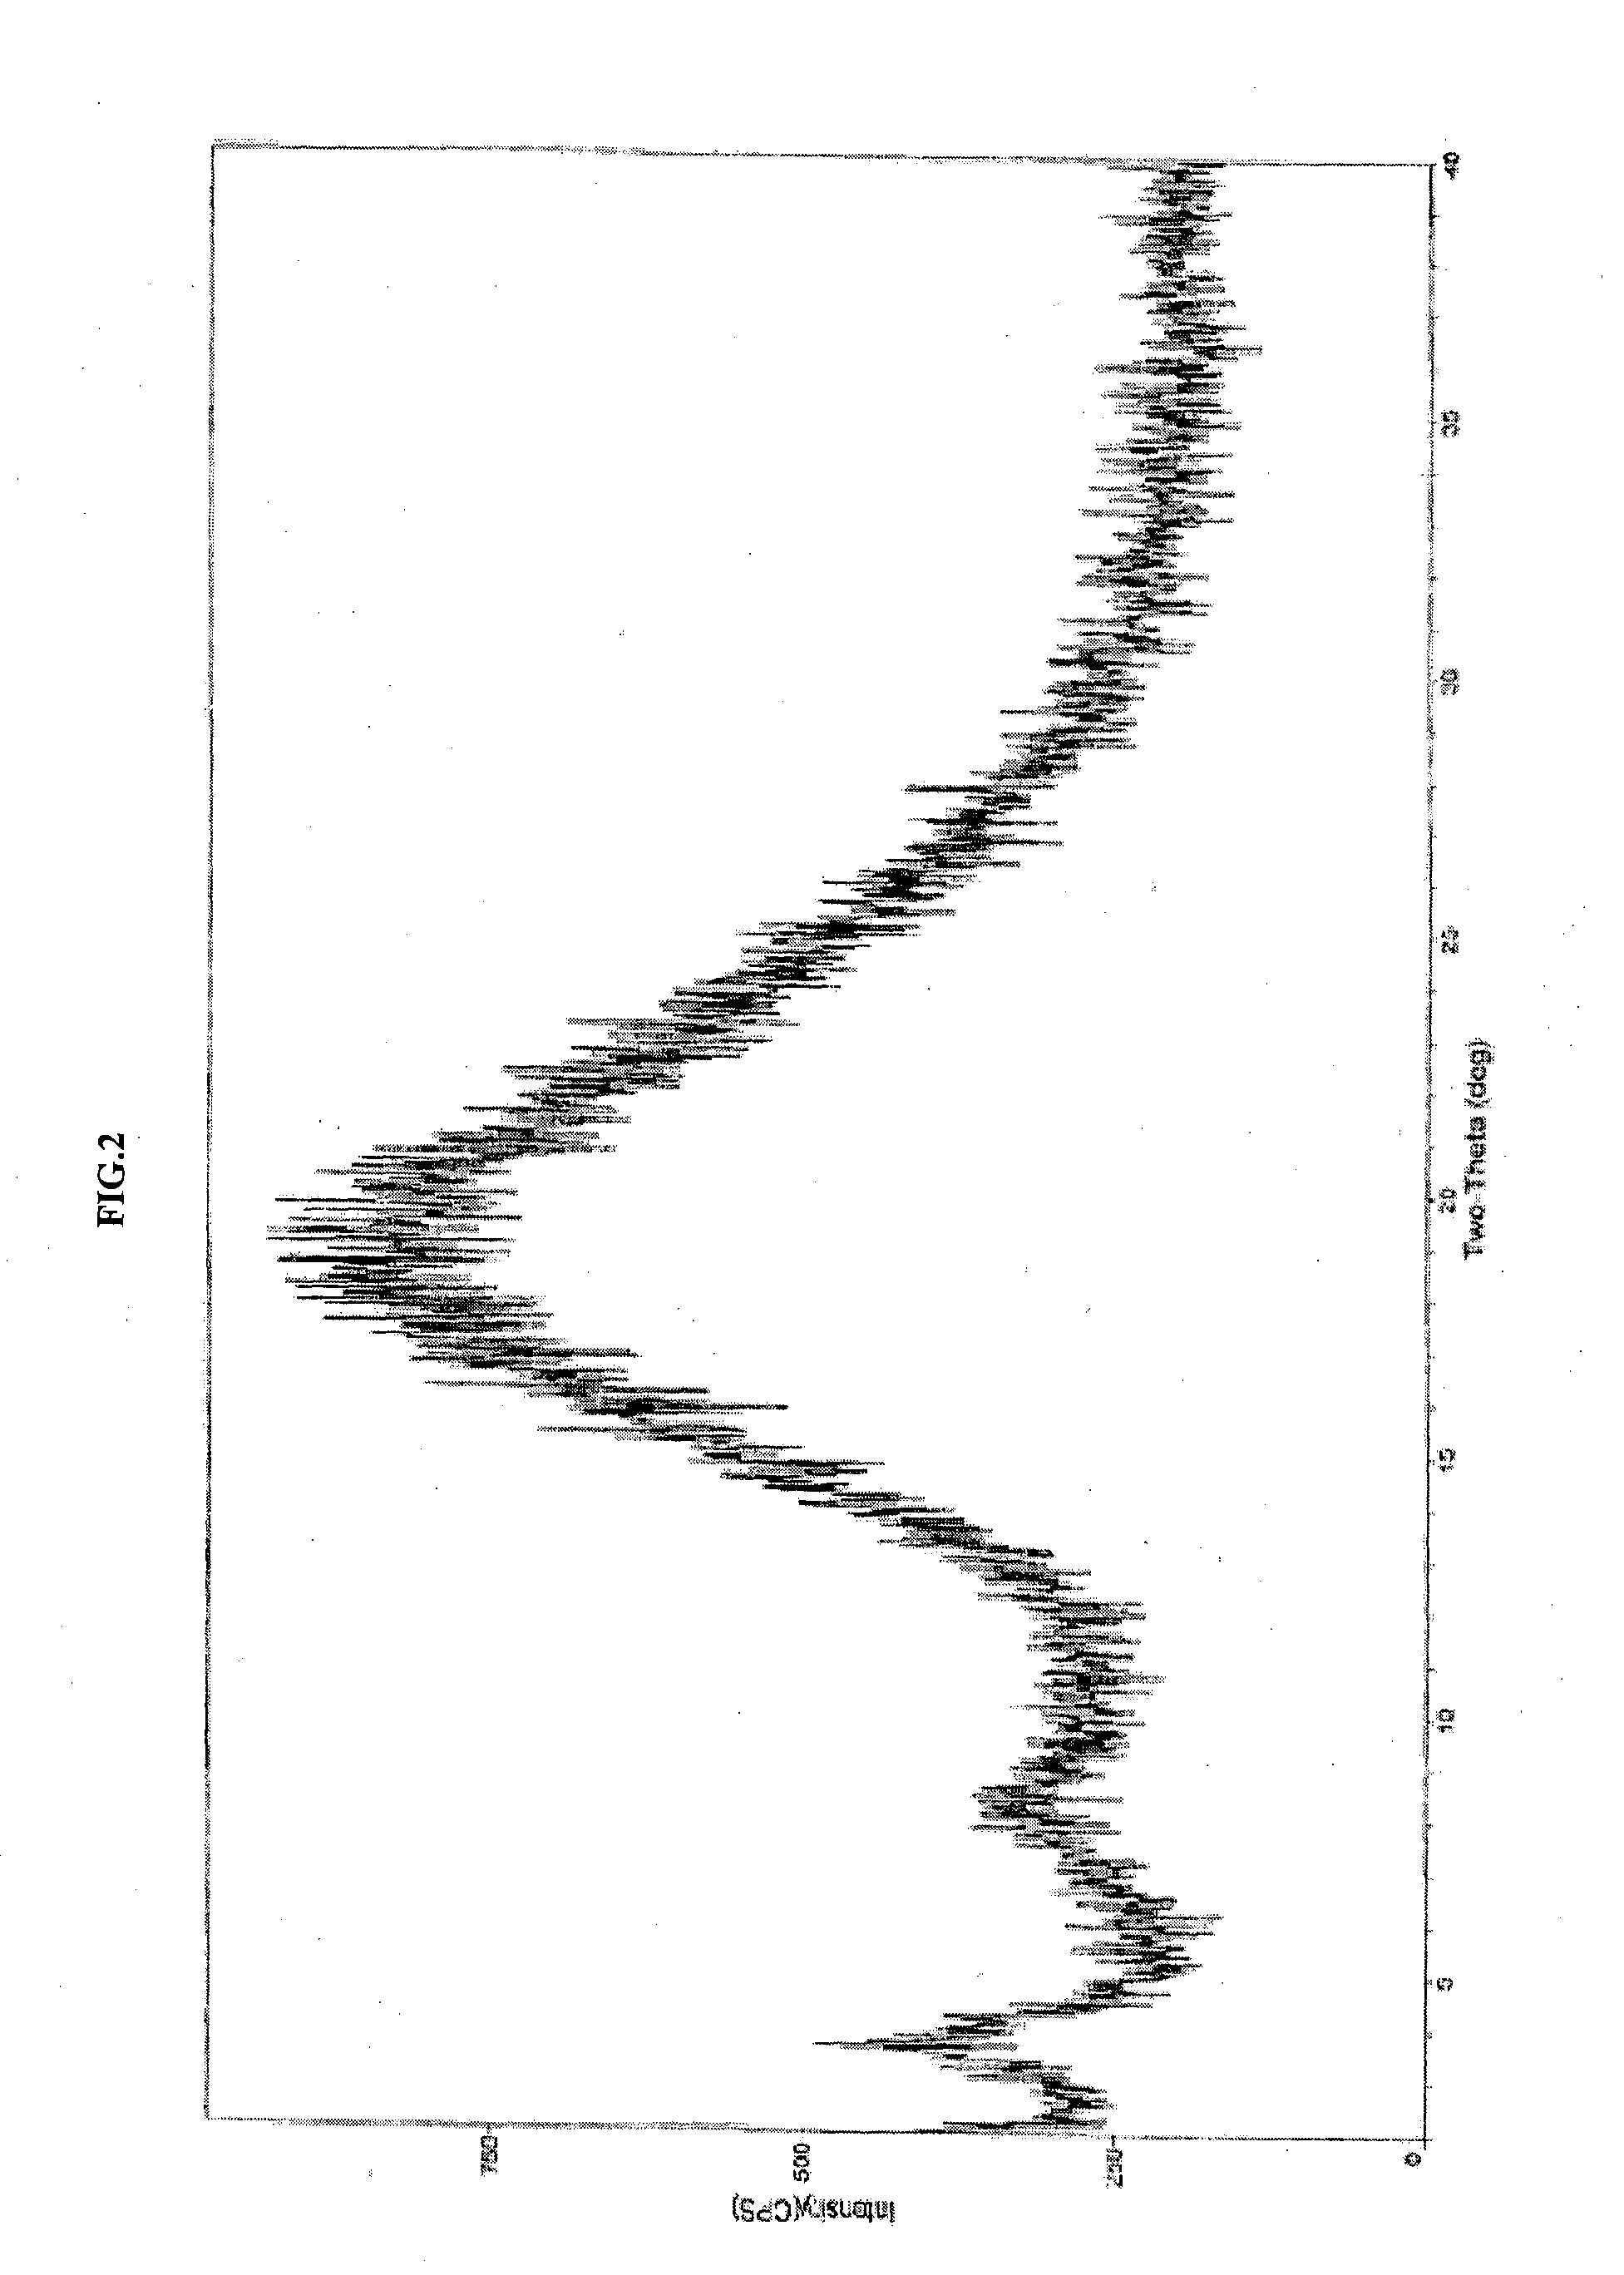 Polymorphic form of pyrrole derivative and intermediate thereof